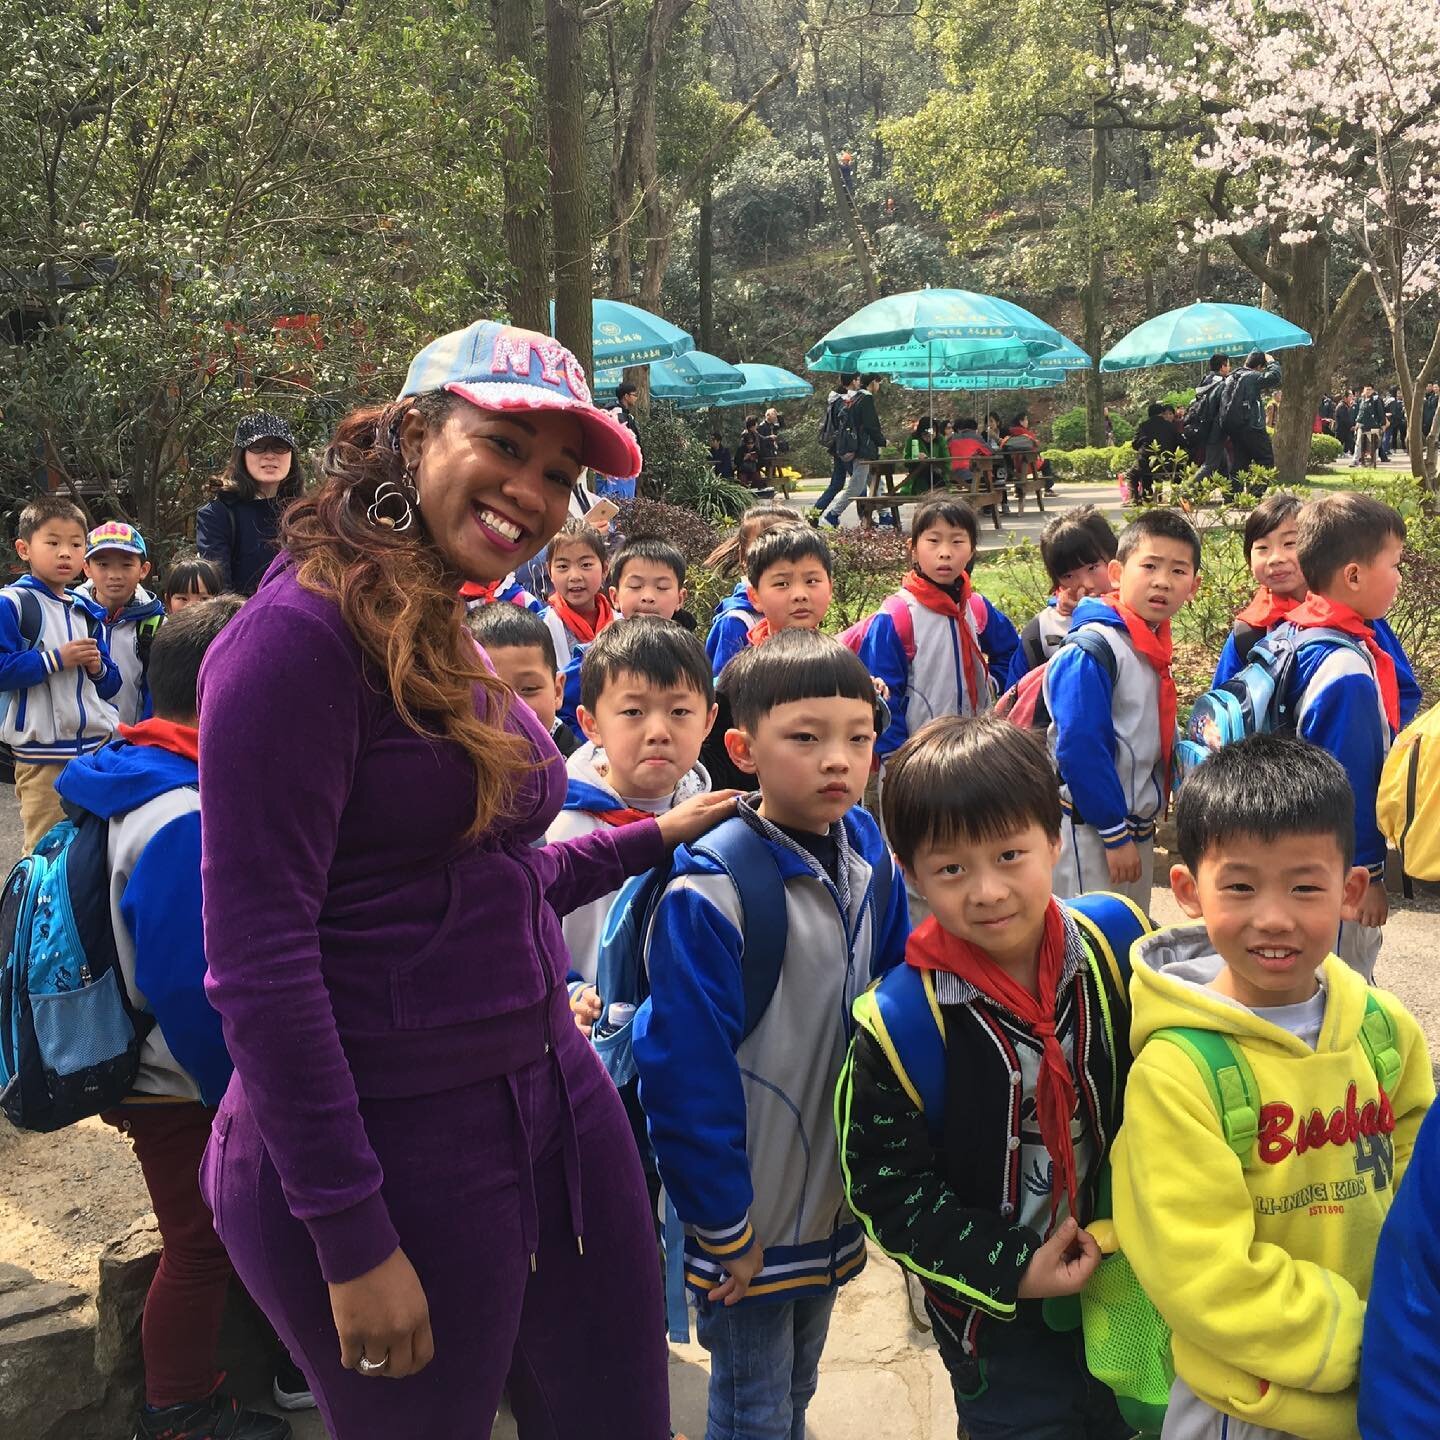 Me in China 🇨🇳 pre-PANDEMIC where I ran into a bunch of school children. Seems like hate isn&rsquo;t an eye 👁 issue meaning we hate what we see, but a heart &hearts;️ issue meaning hate what we feel inside. #stopasianhate &amp; have a heart &heart